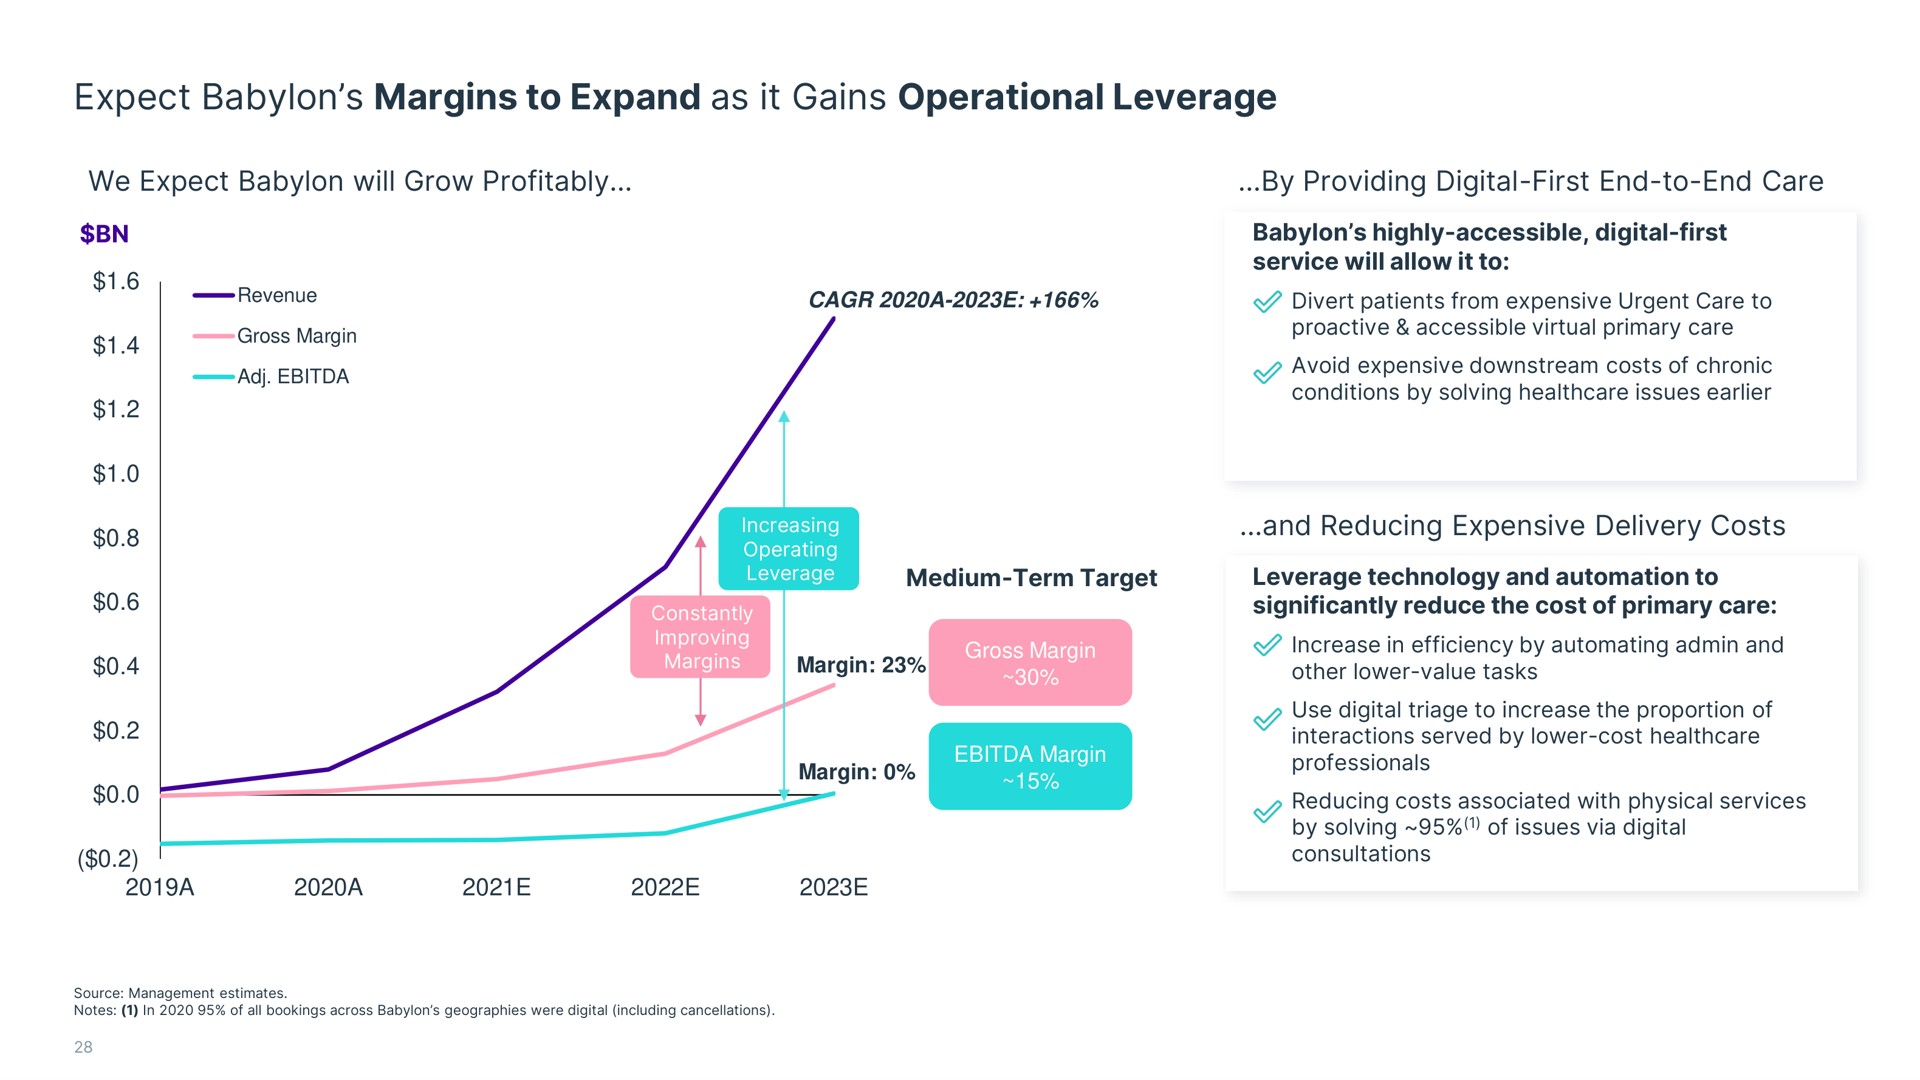 expect margins to expand as it gains operational leverage | Babylon